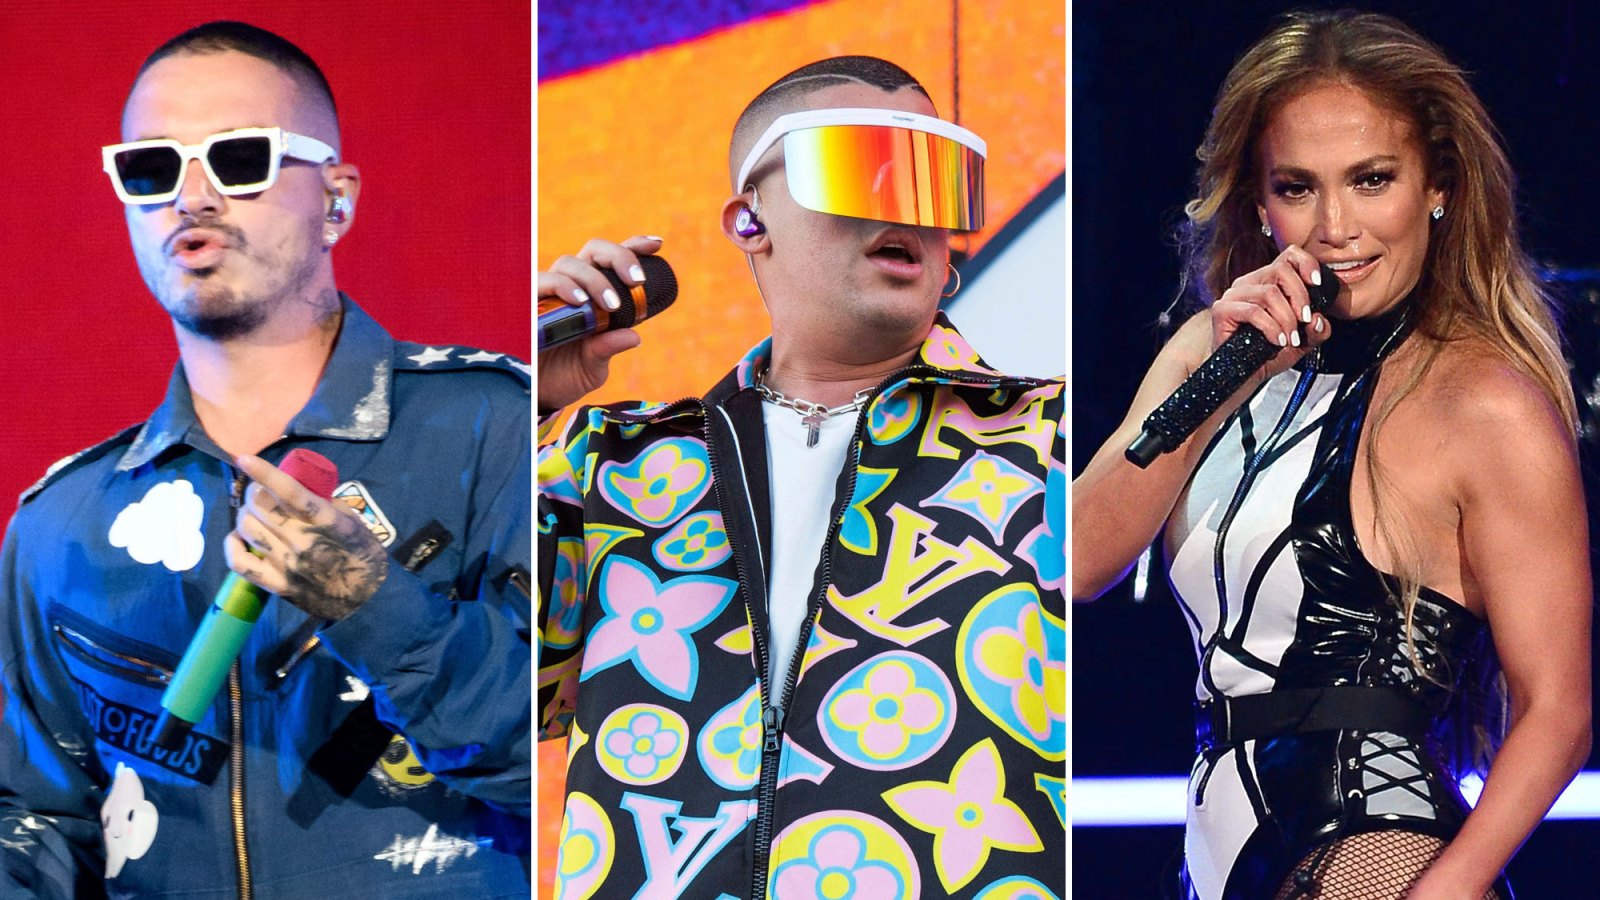 J Balvin and Bad Bunny Performing With J. Lo, Shakira at Super Bowl Halftime Show